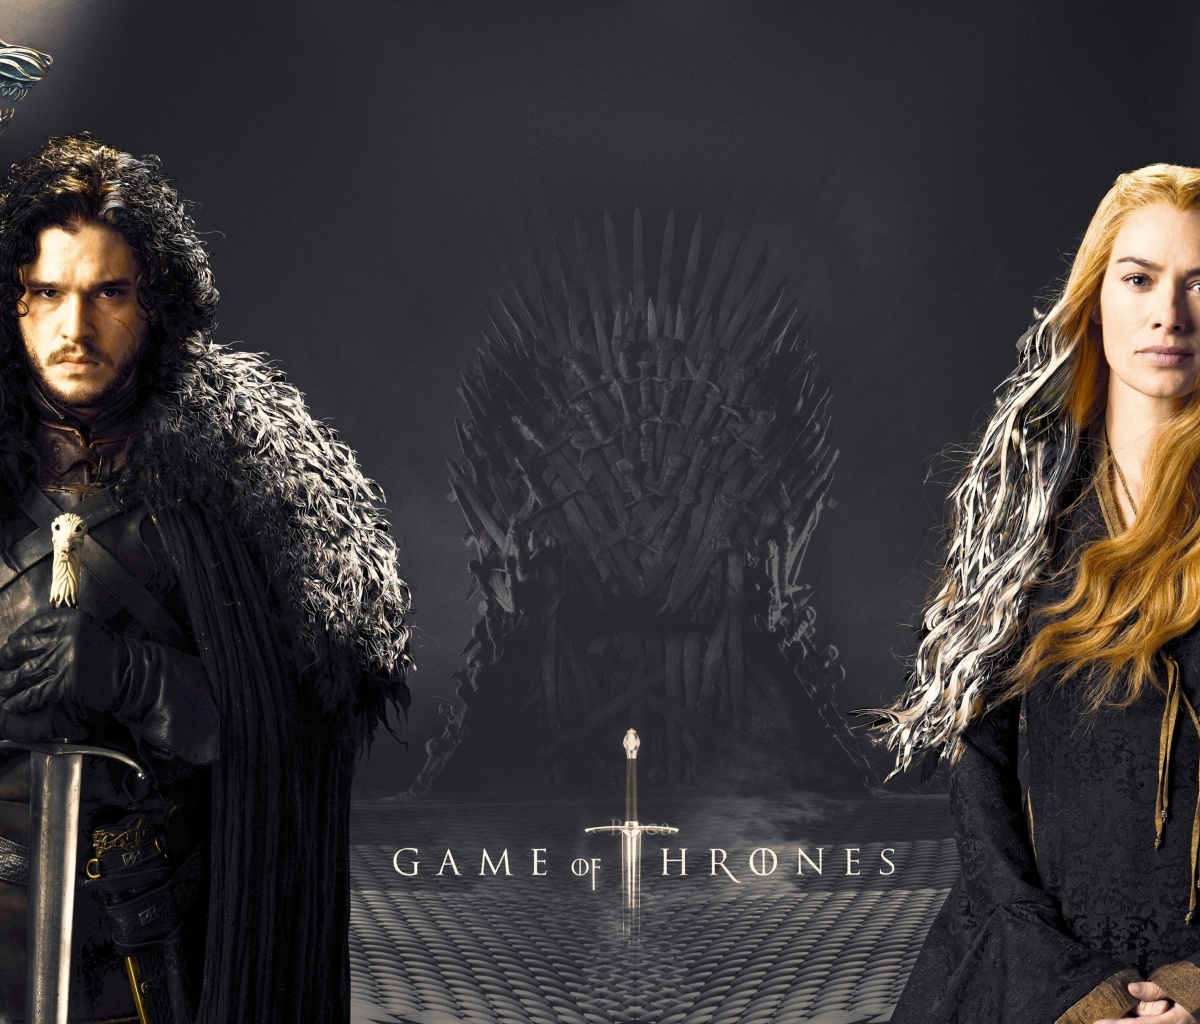 Game Of Thrones actors Jon Snow and Cersei Lannister screenshot #1 1200x1024